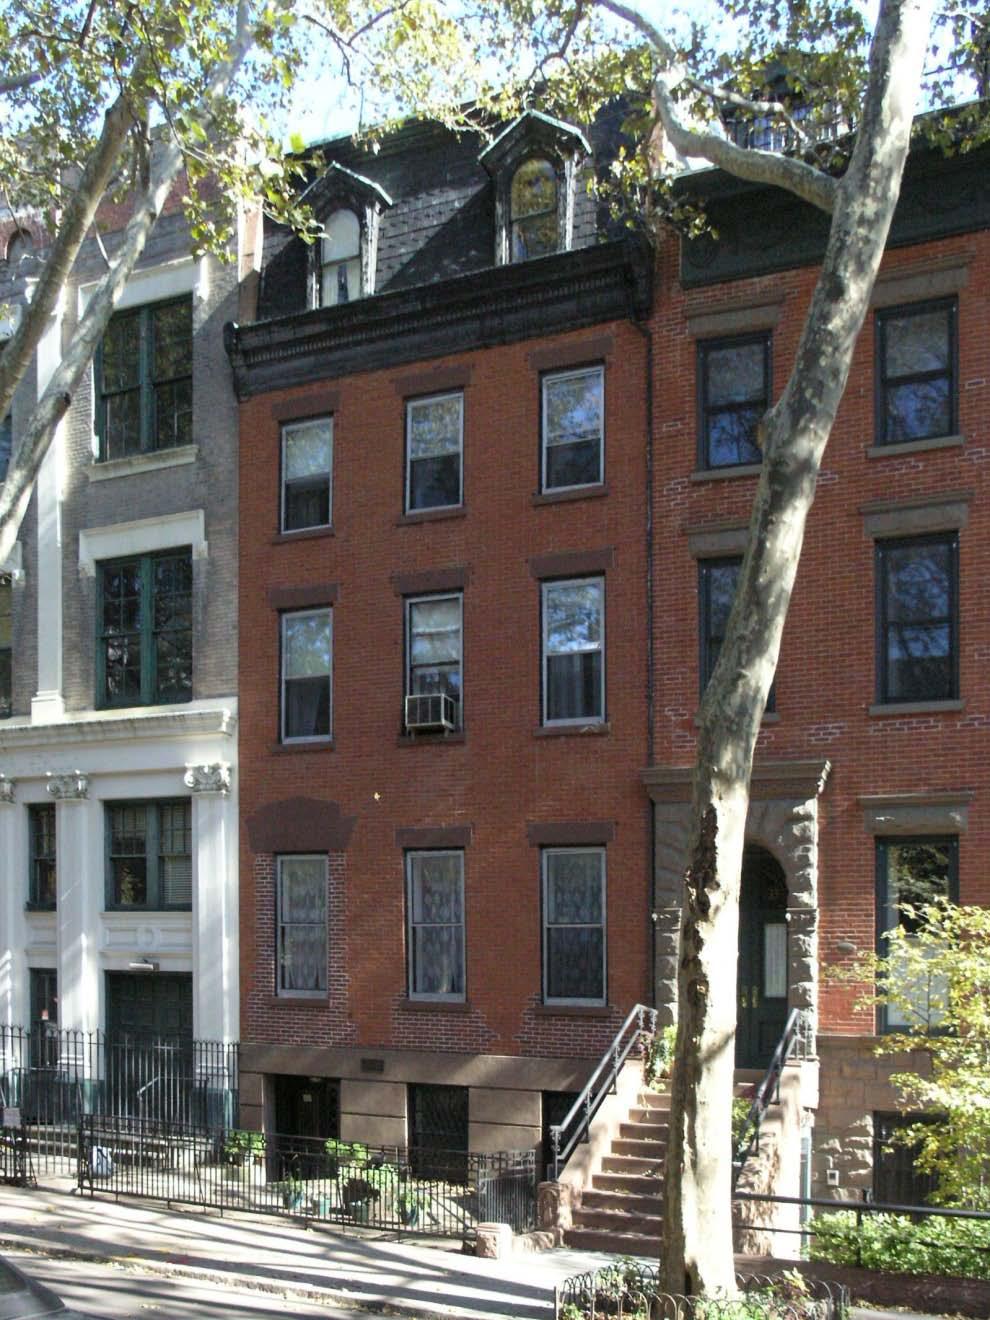 This Row House is a brick and wood structure that is 4-stories tall designed in the reminiscent styles of The Second Empire Style (1860-1975), which is similar to the Italianate Style that is also